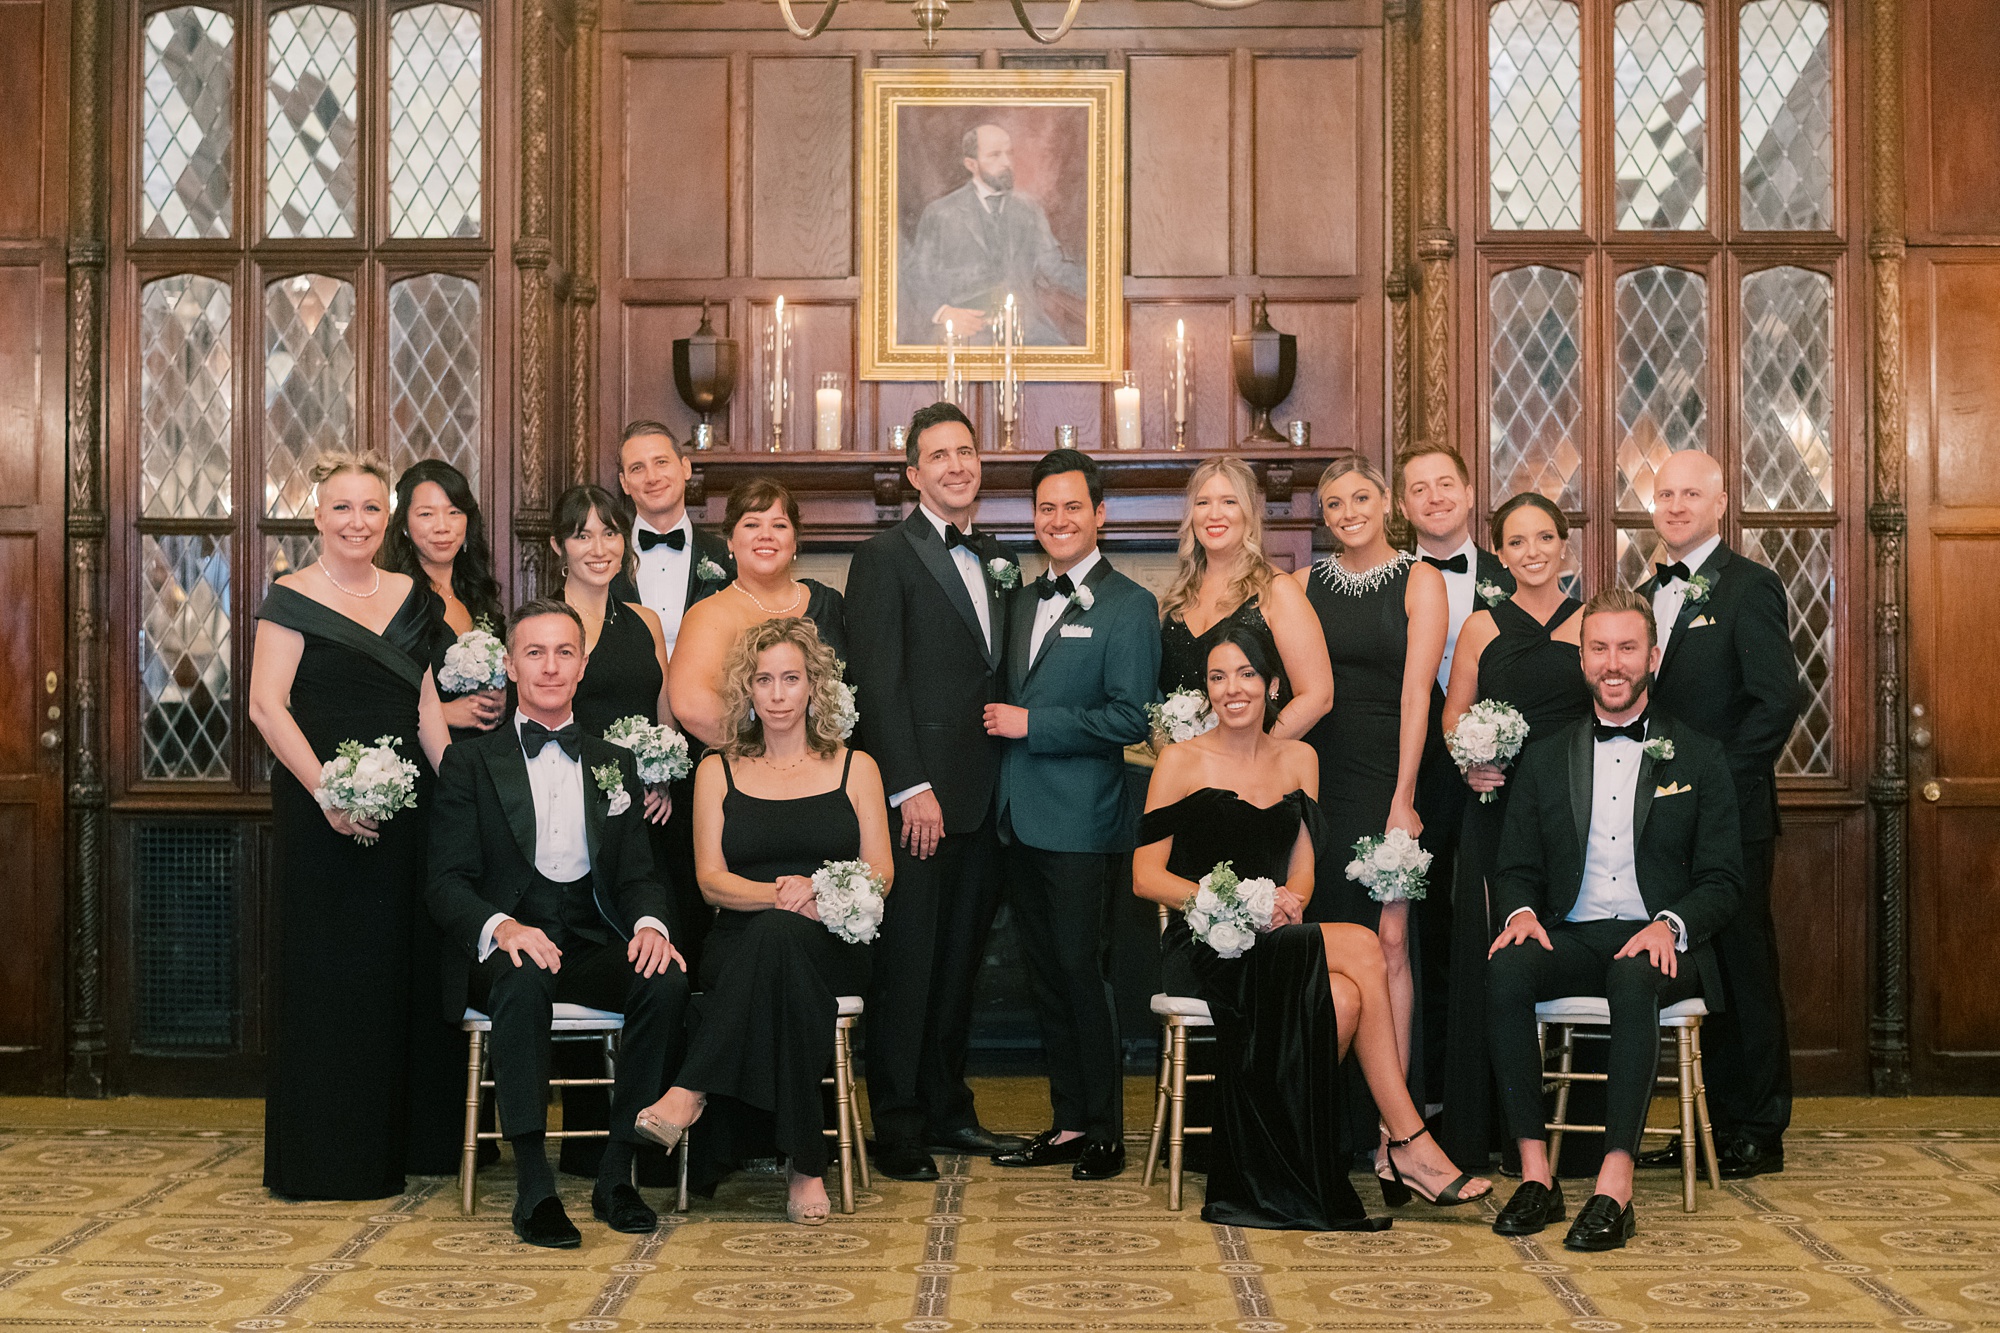 grooms pose with bridal party in black and white attire inside the Hay Adams Hotel